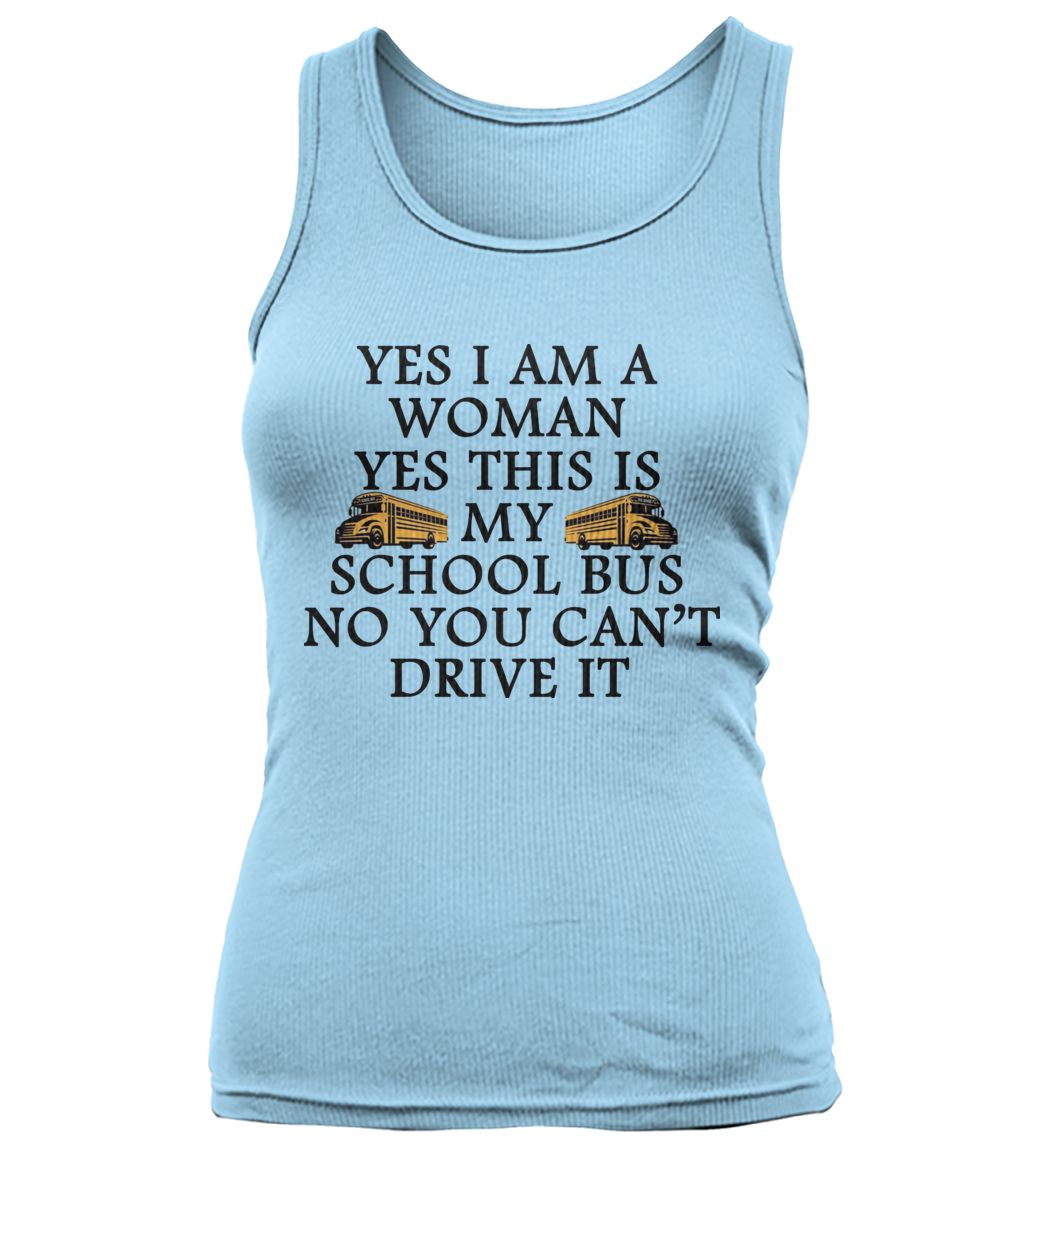 Yes I am a woman yes this is my school bus no you can't drive it women's tank top